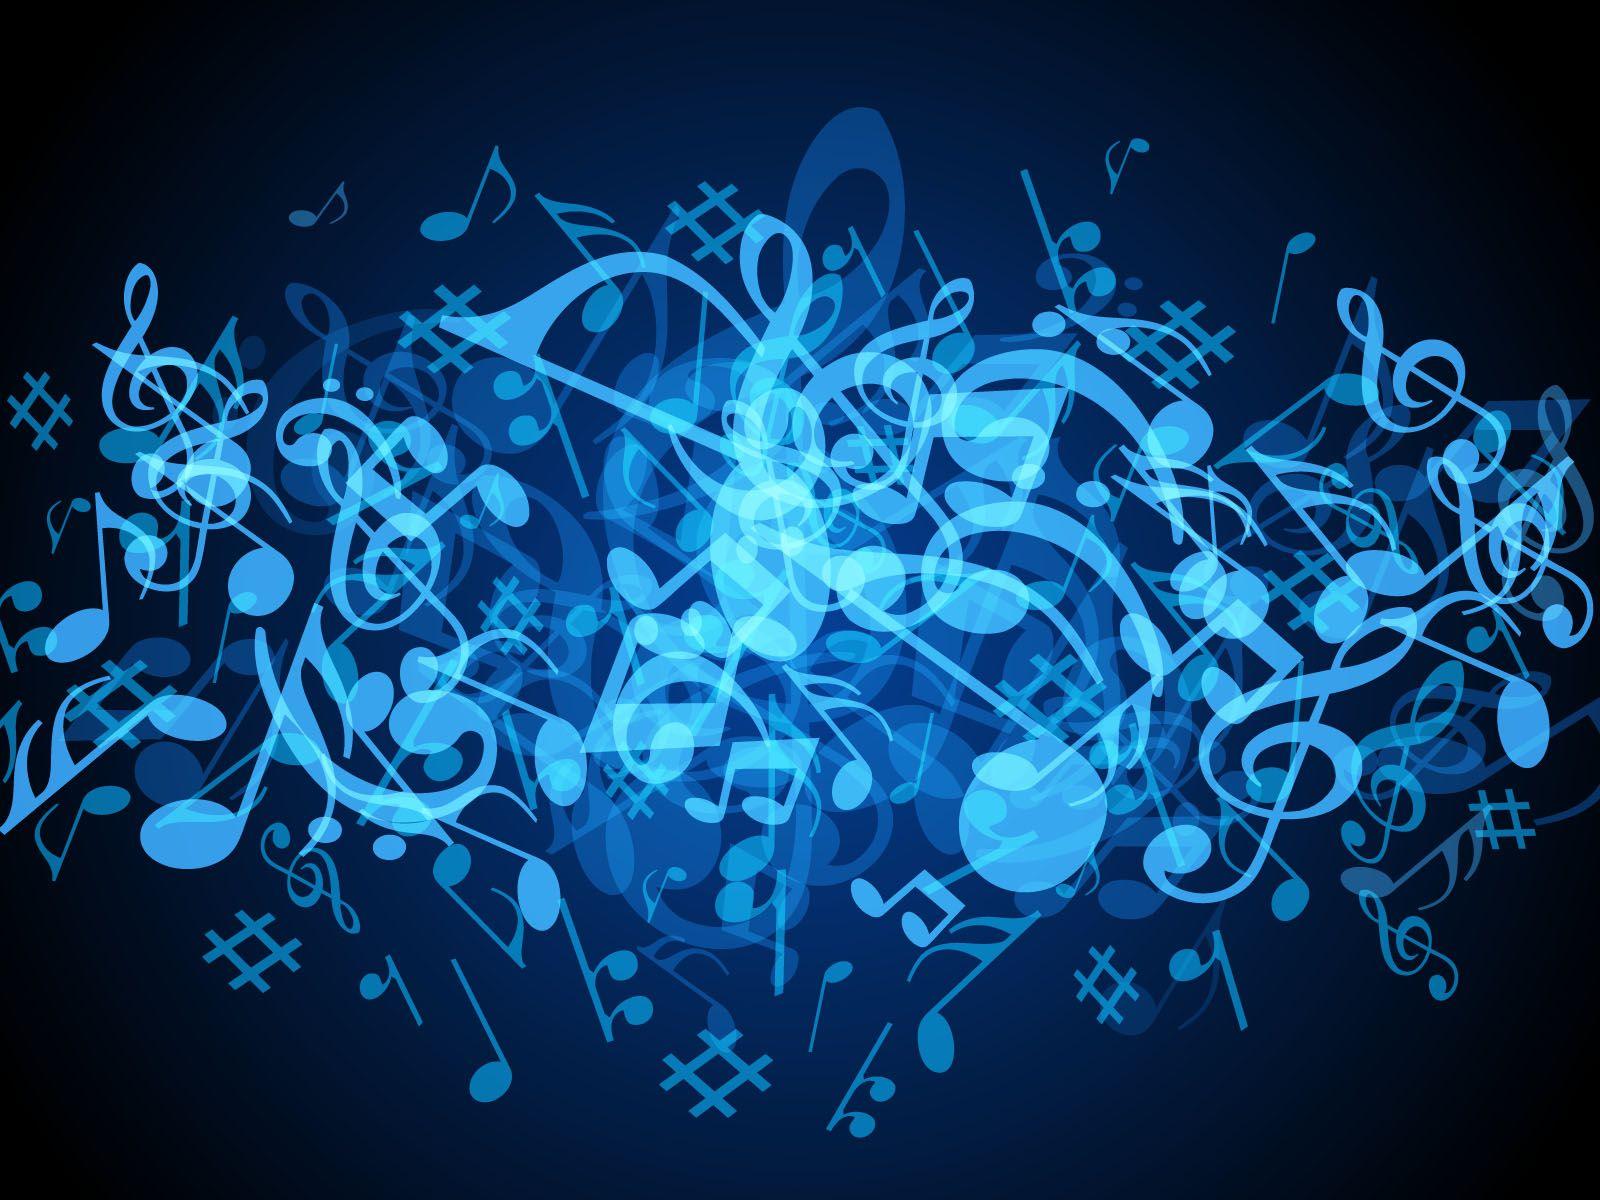 download free background music no copyright